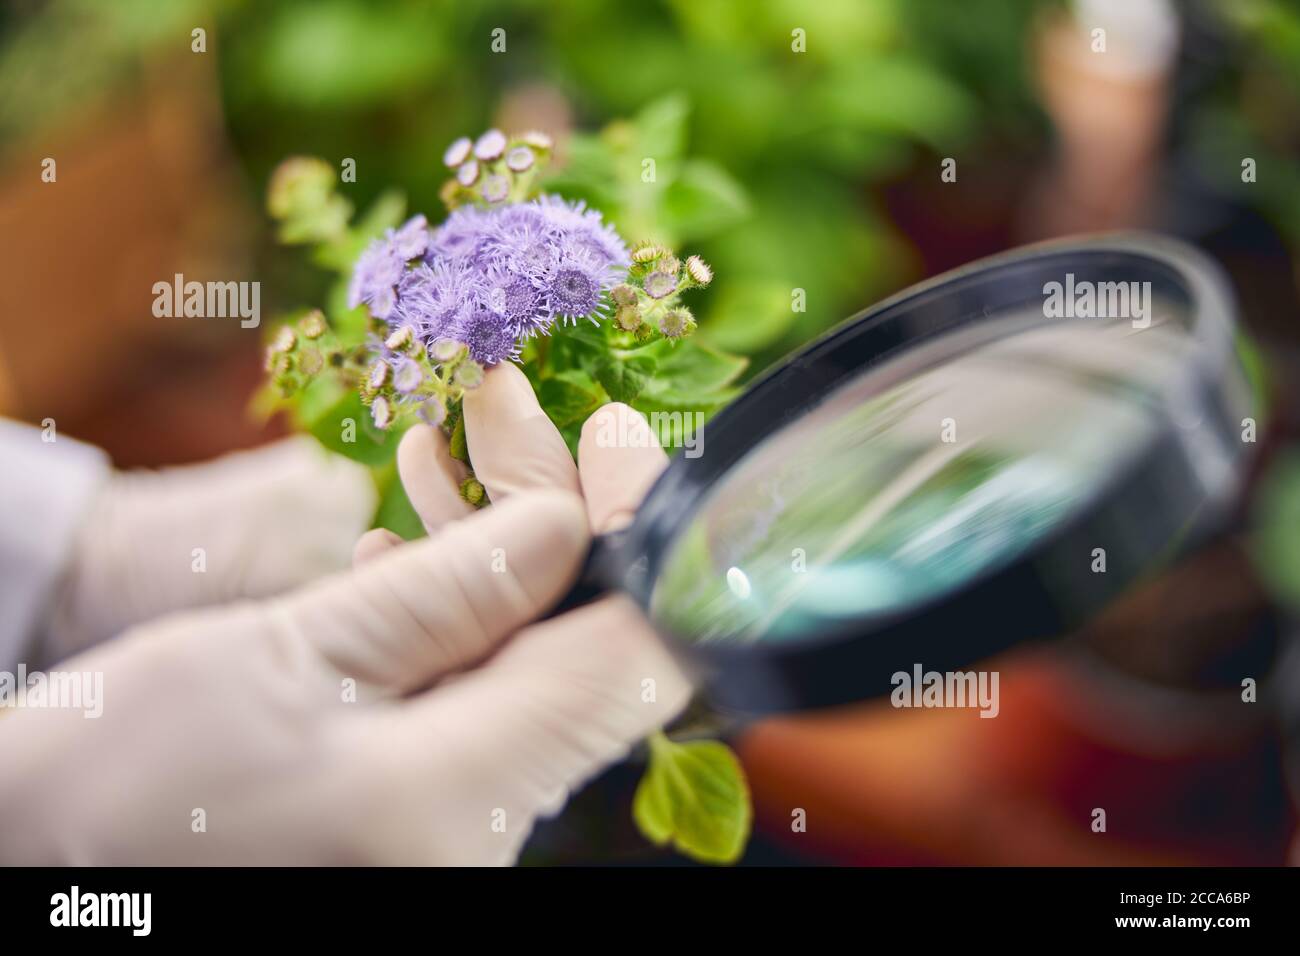 Botanist with a flowering plant and an optical device Stock Photo